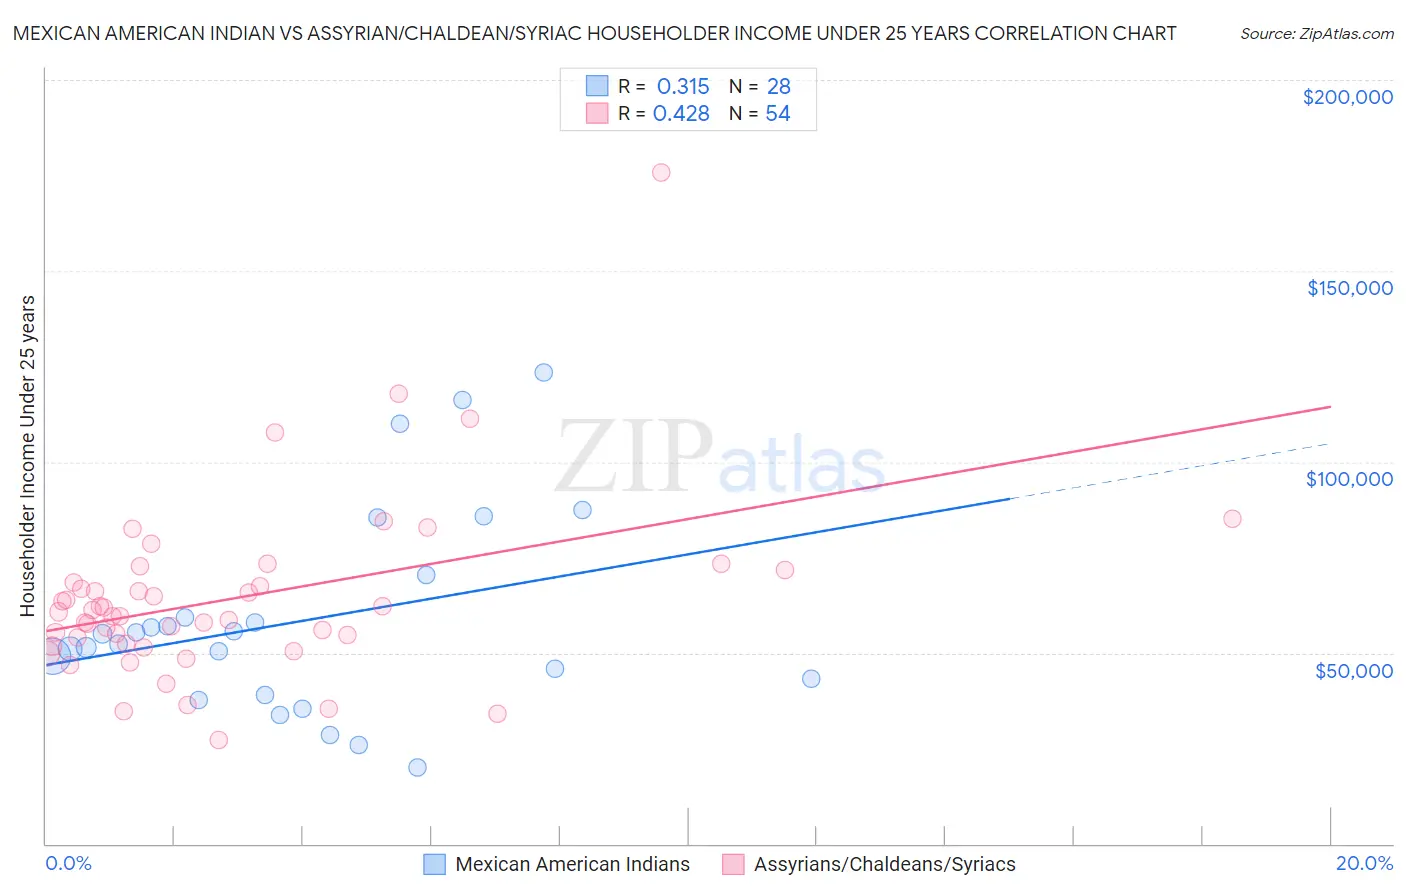 Mexican American Indian vs Assyrian/Chaldean/Syriac Householder Income Under 25 years